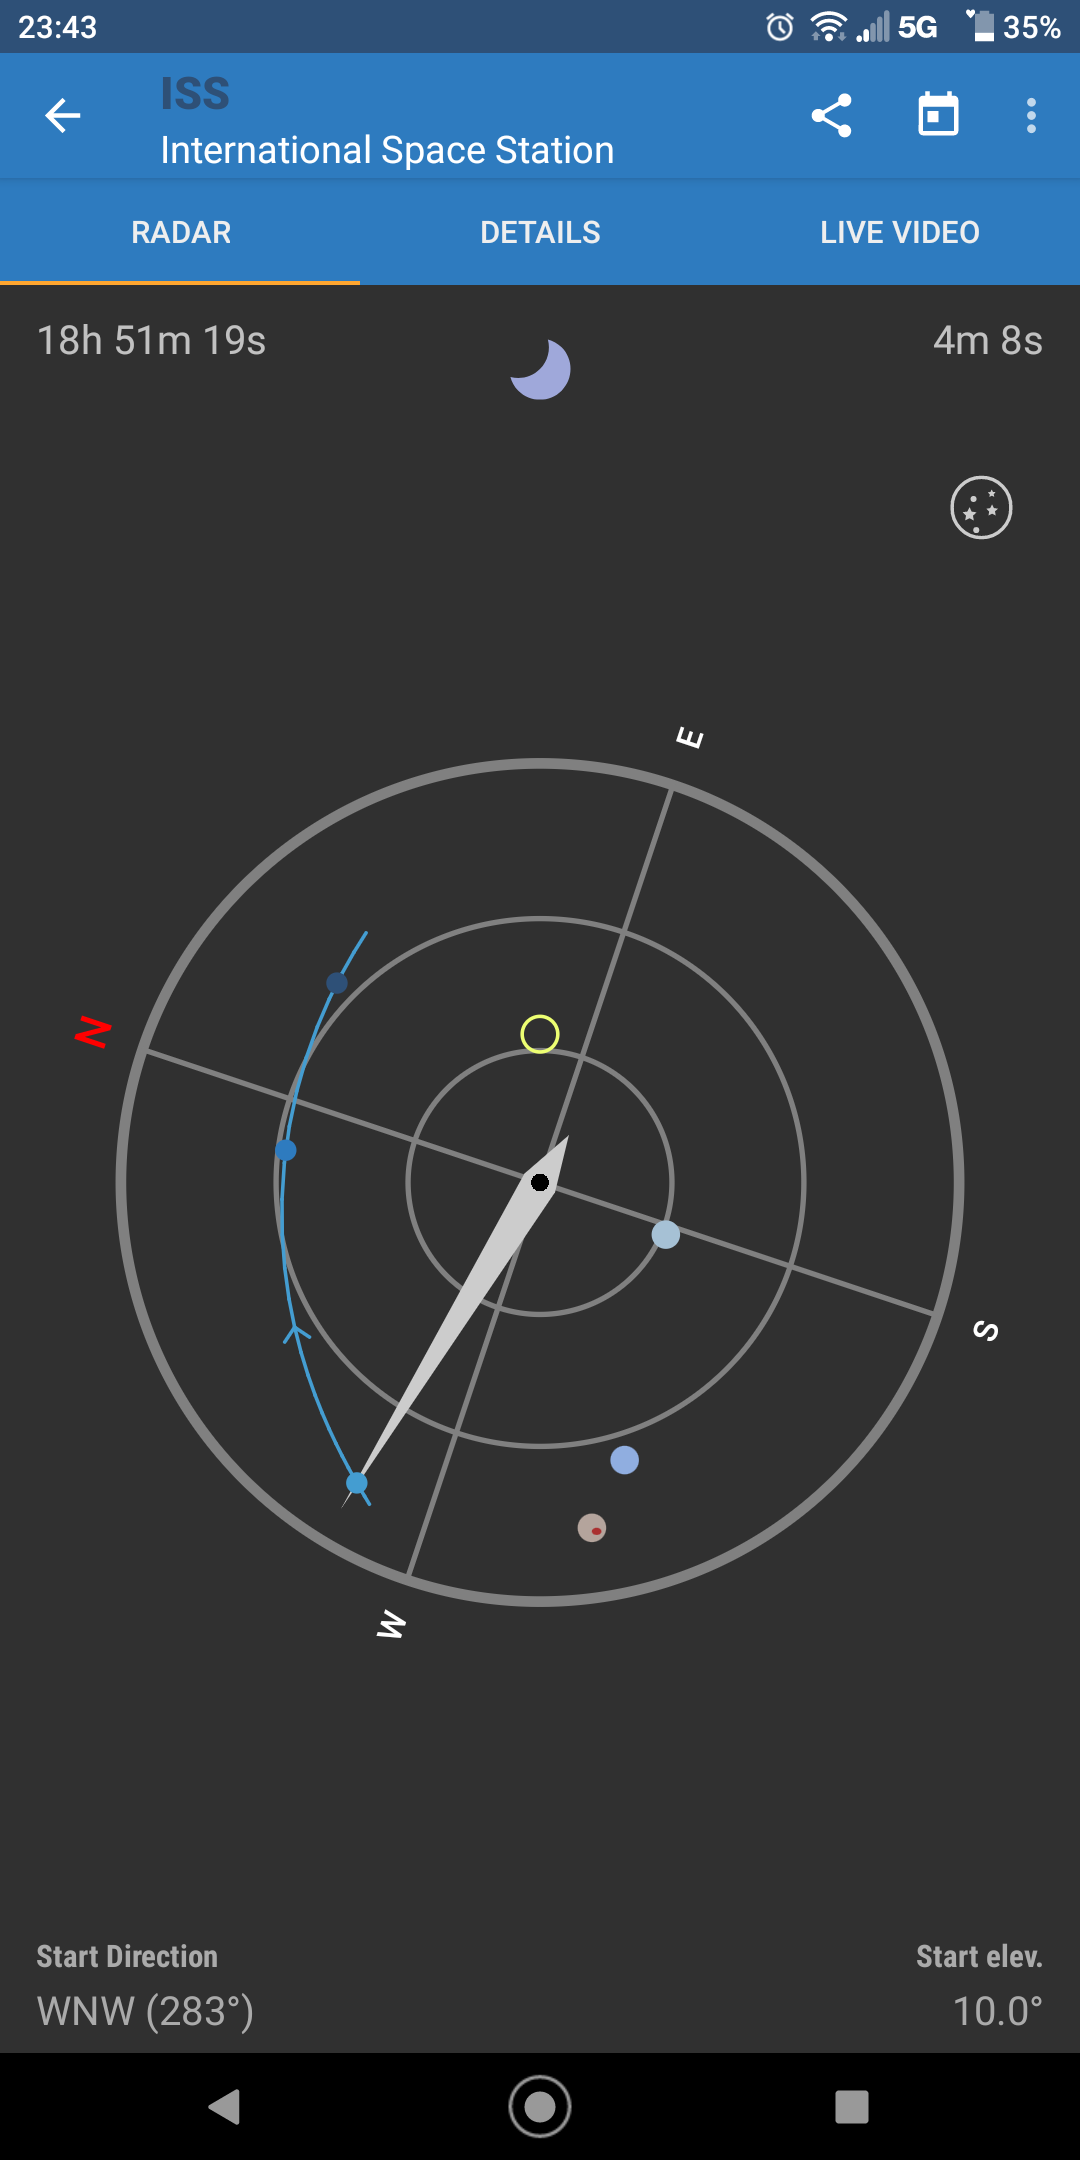 An application with targeting rings, a blue line representing a satellite pass, and a yellow ciricle representing the direction the phone is pointing.